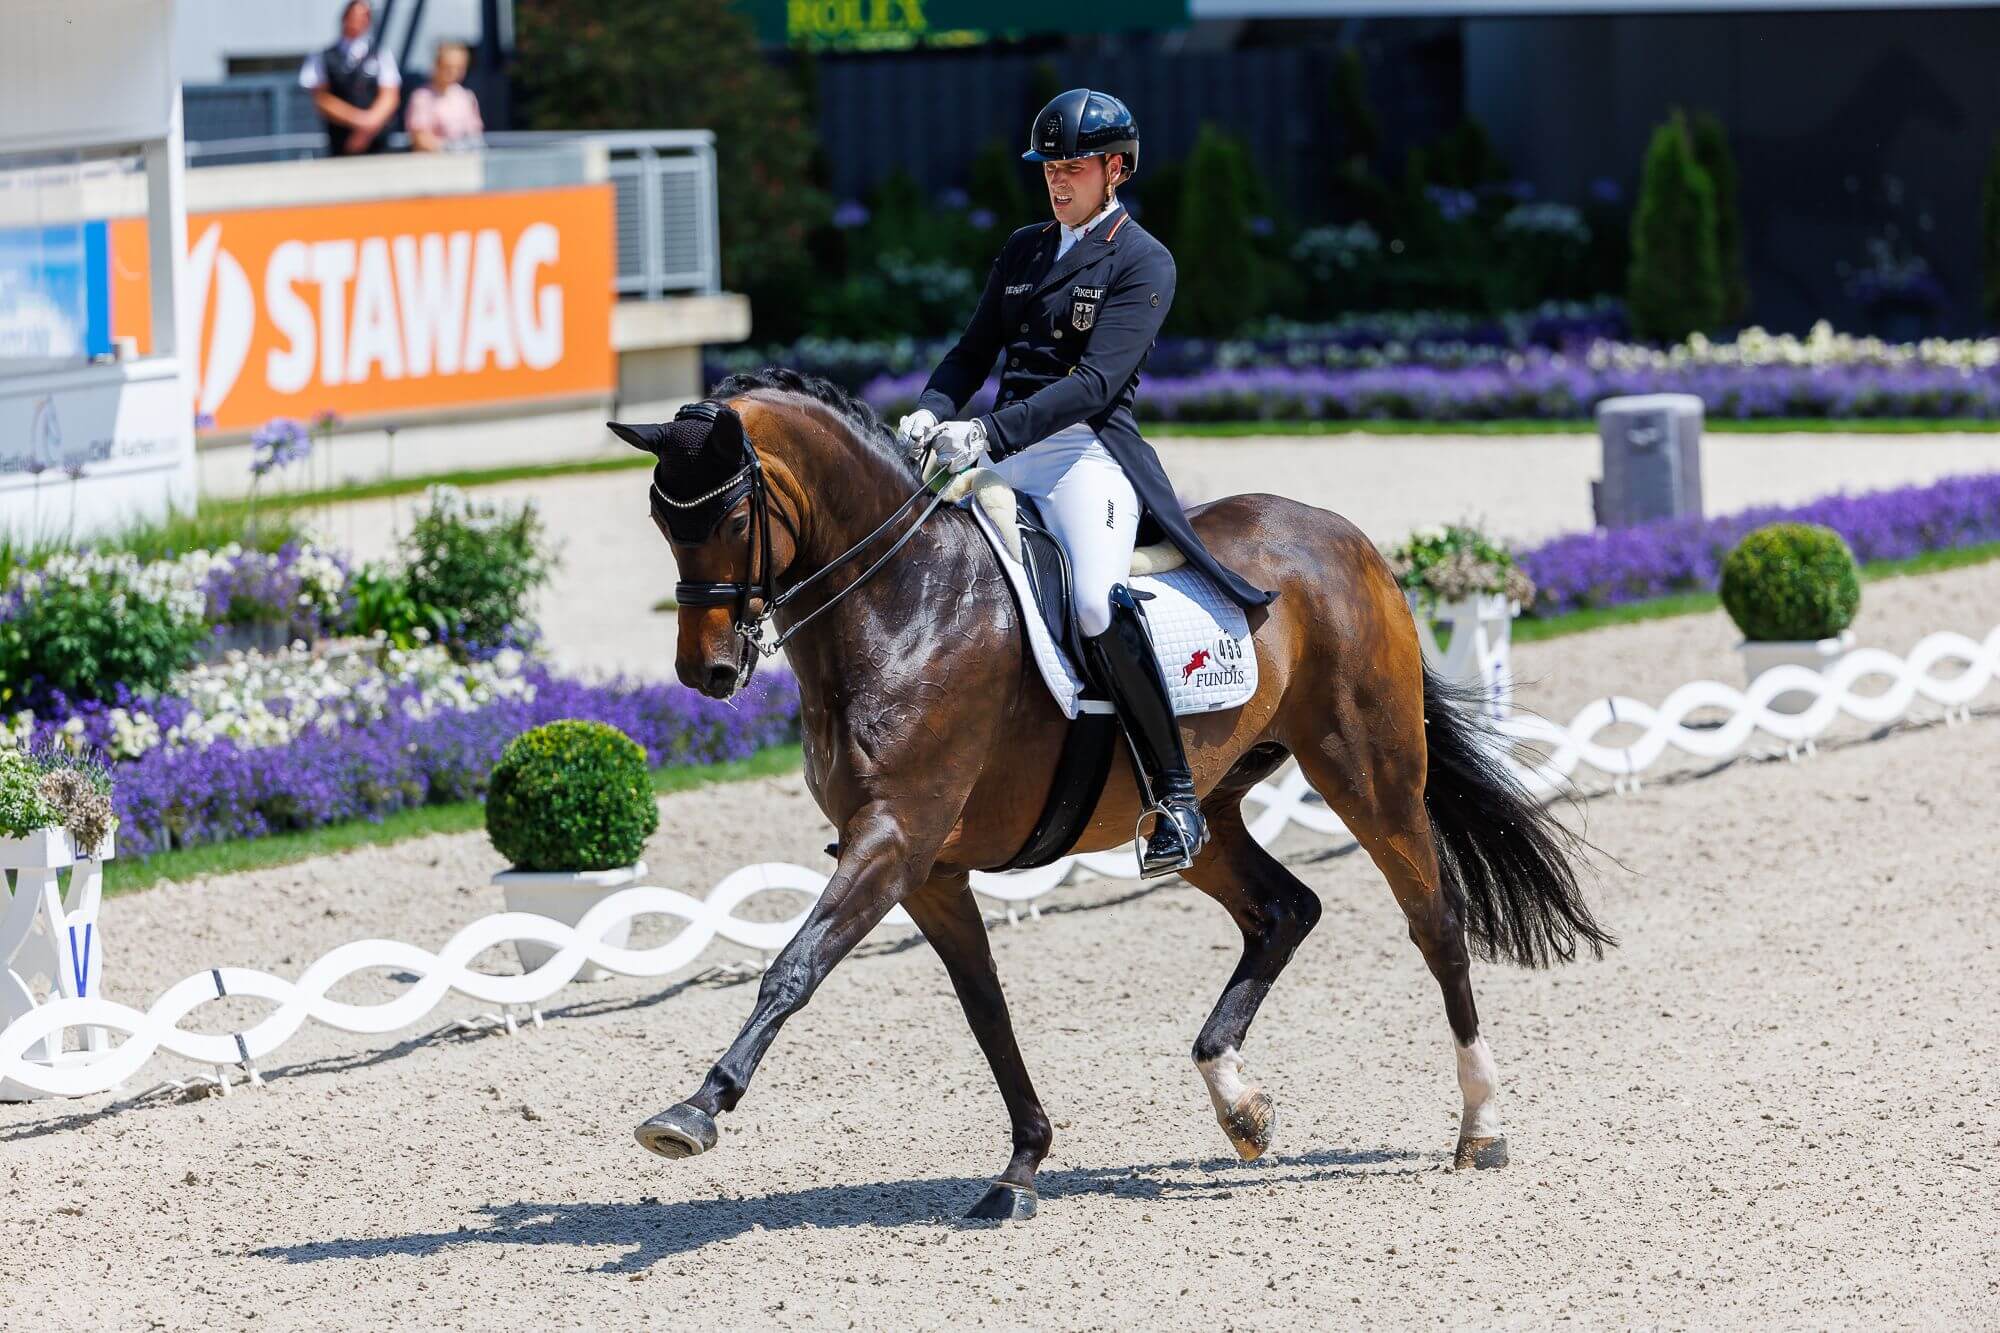 Frederic Wandres rode his way to first place in the 4* Prix St. Georges at CHIO Aachen